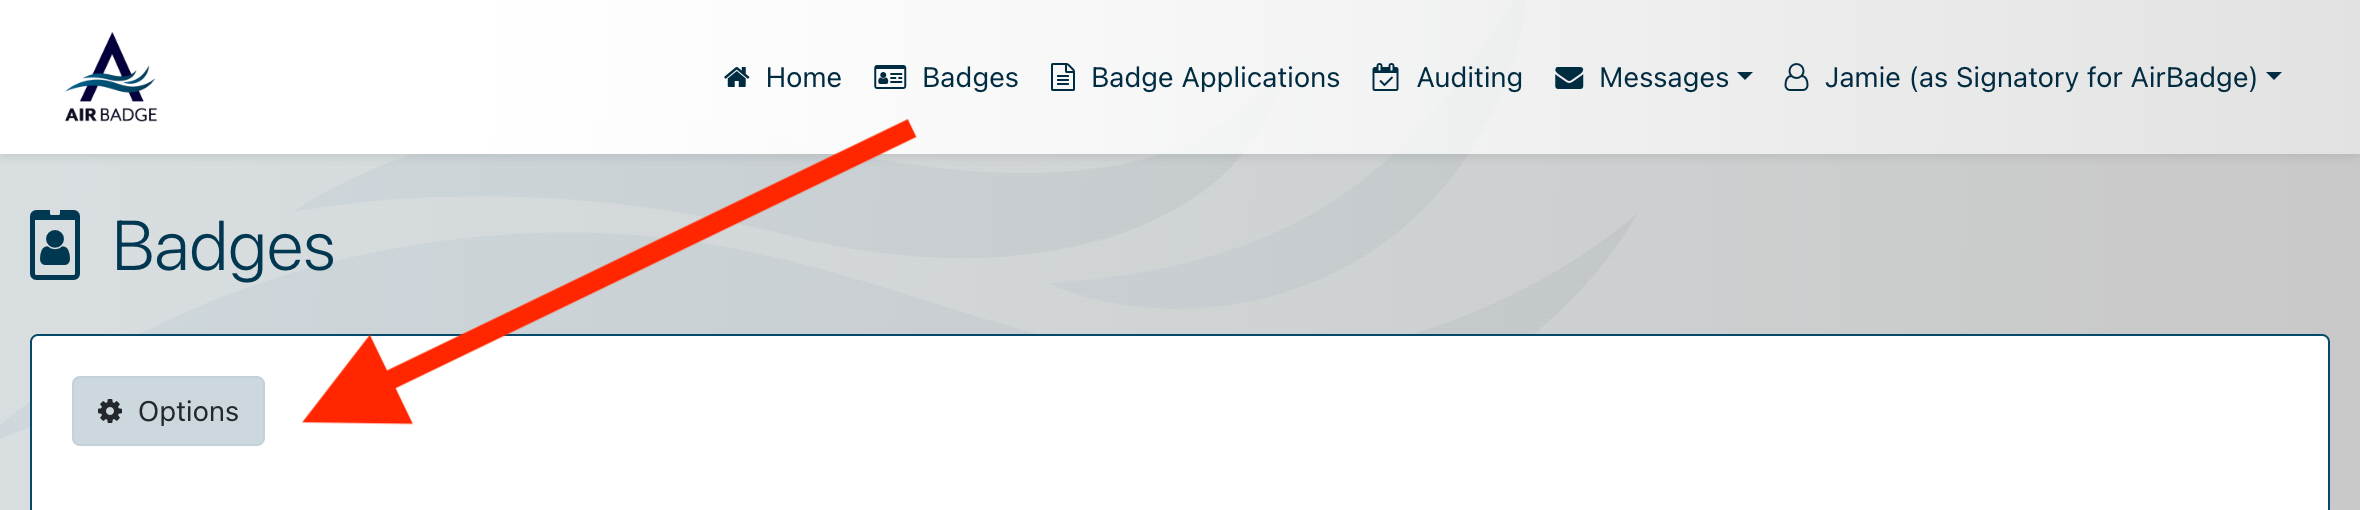 options button on the badges screen